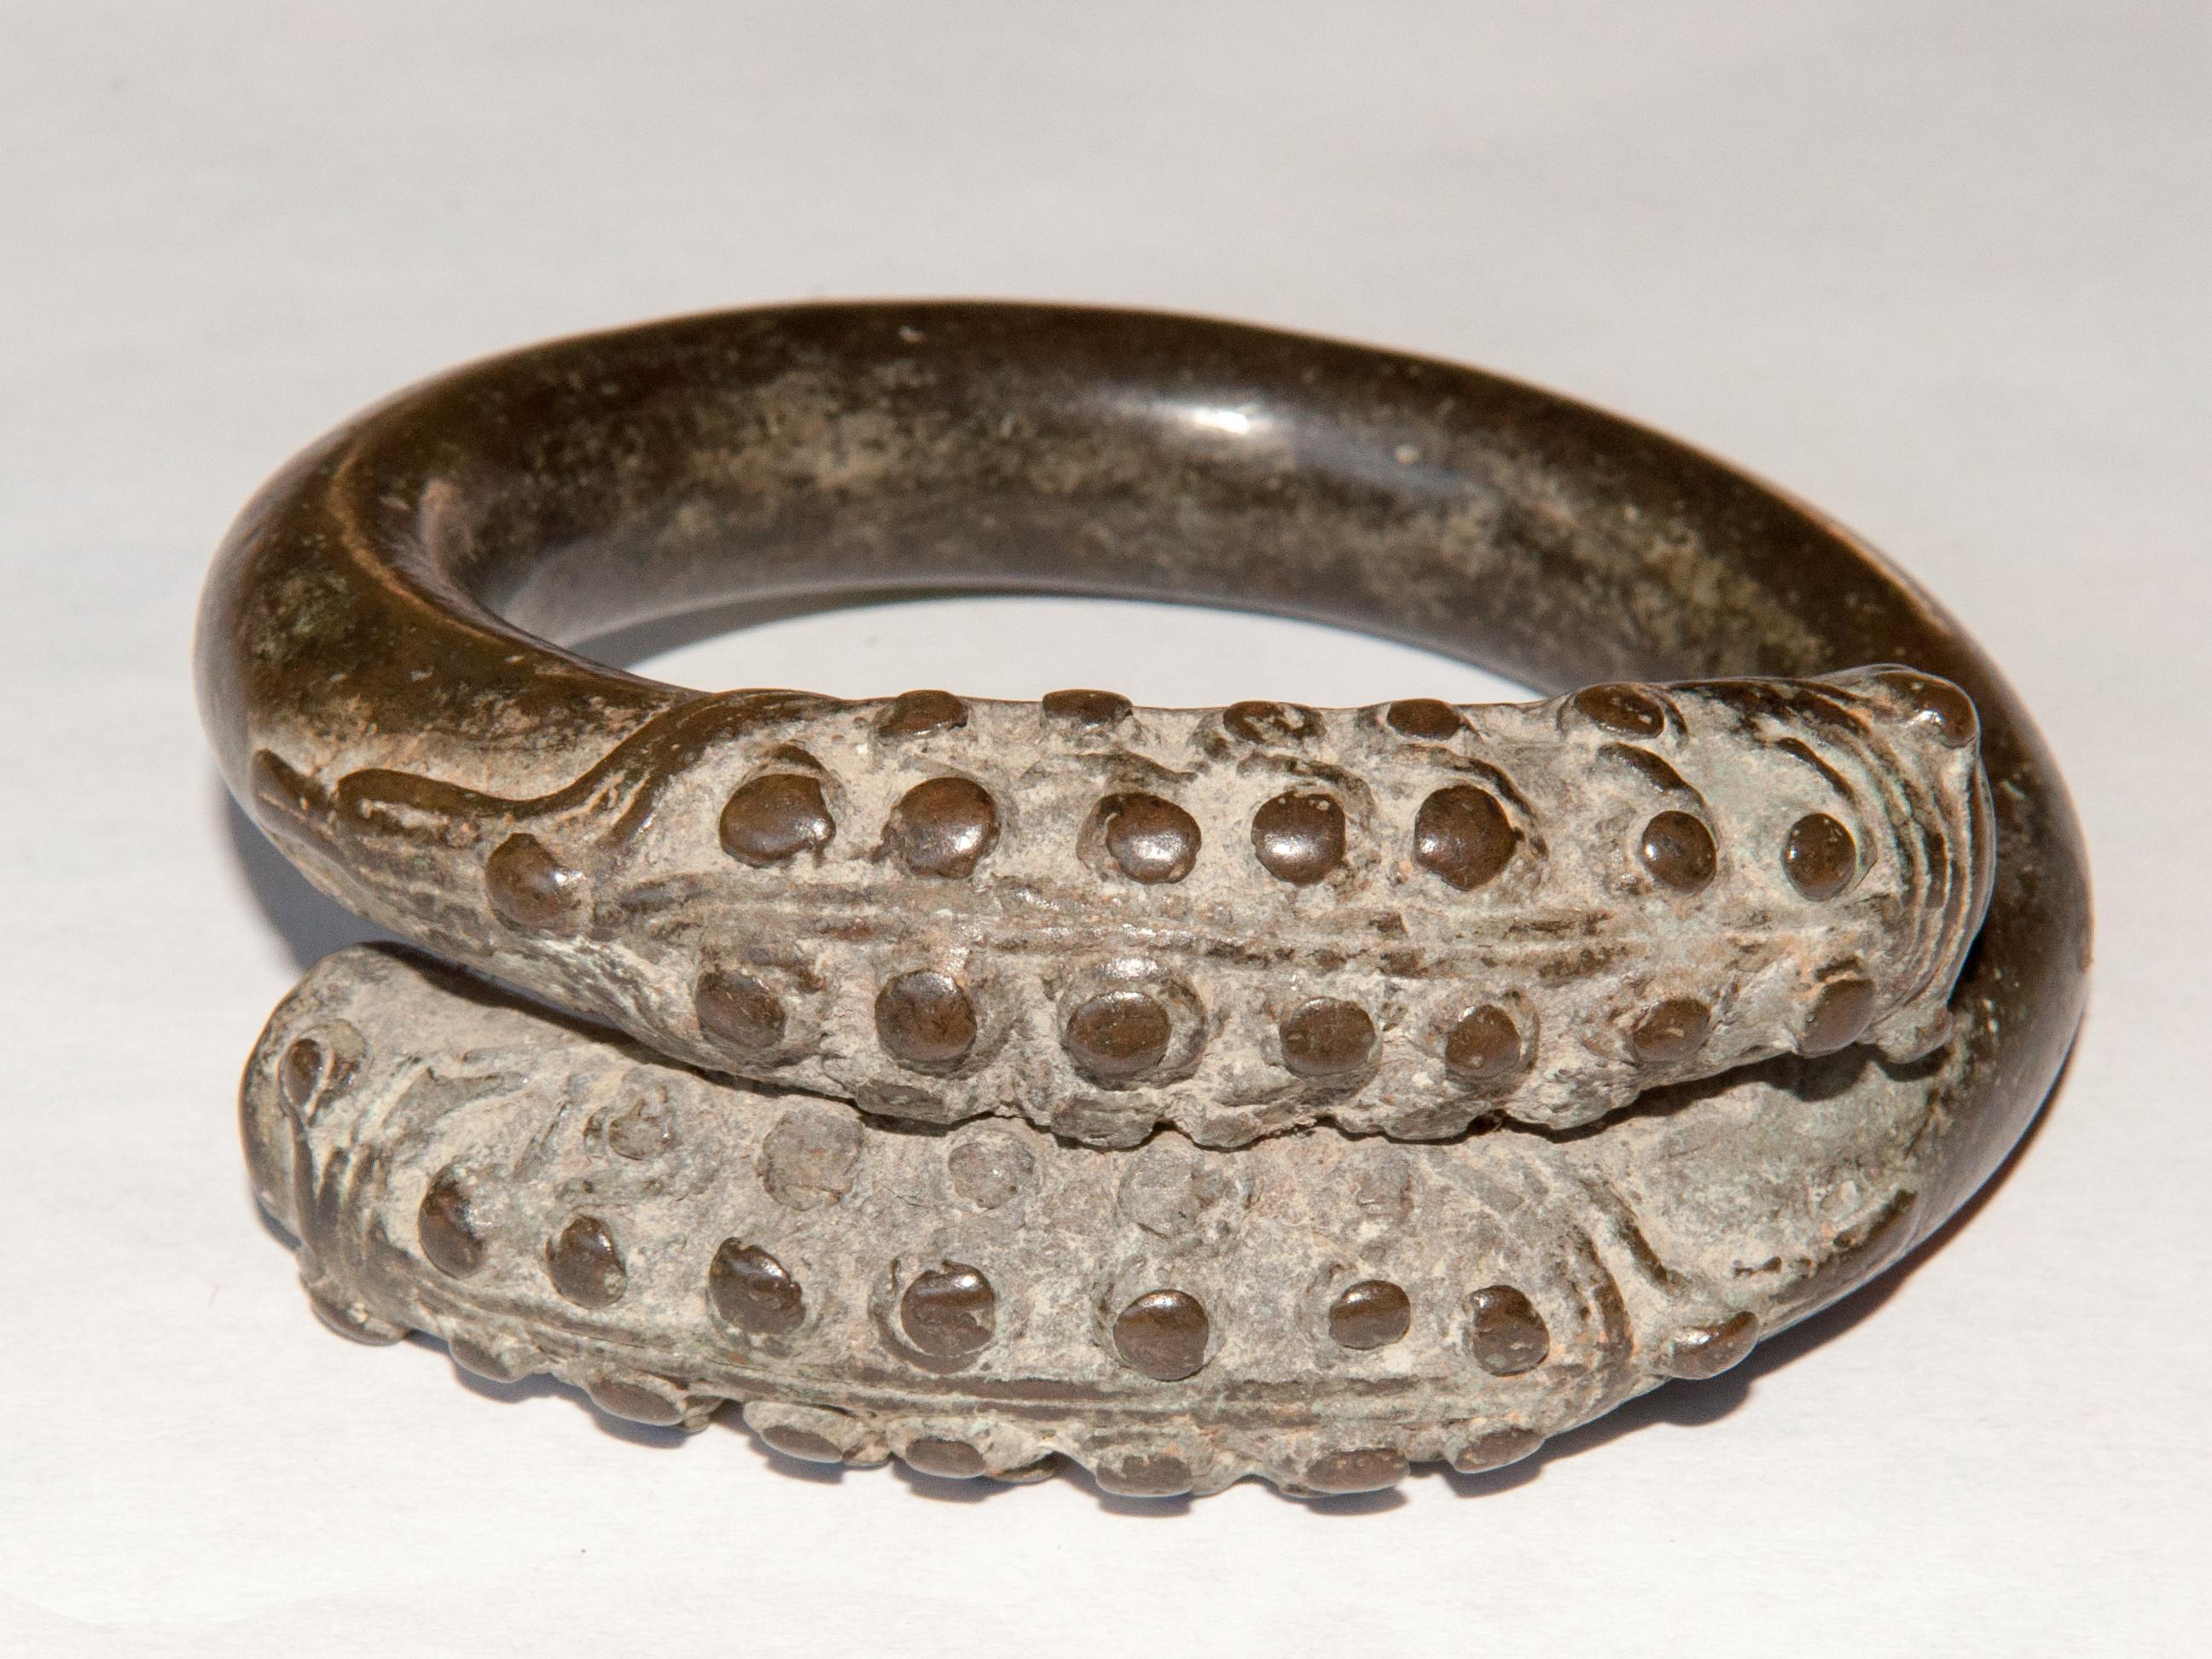 Hand-Crafted Antique Bronze Bracelet from Laos with a Naga or Serpent Motif, 18th Century